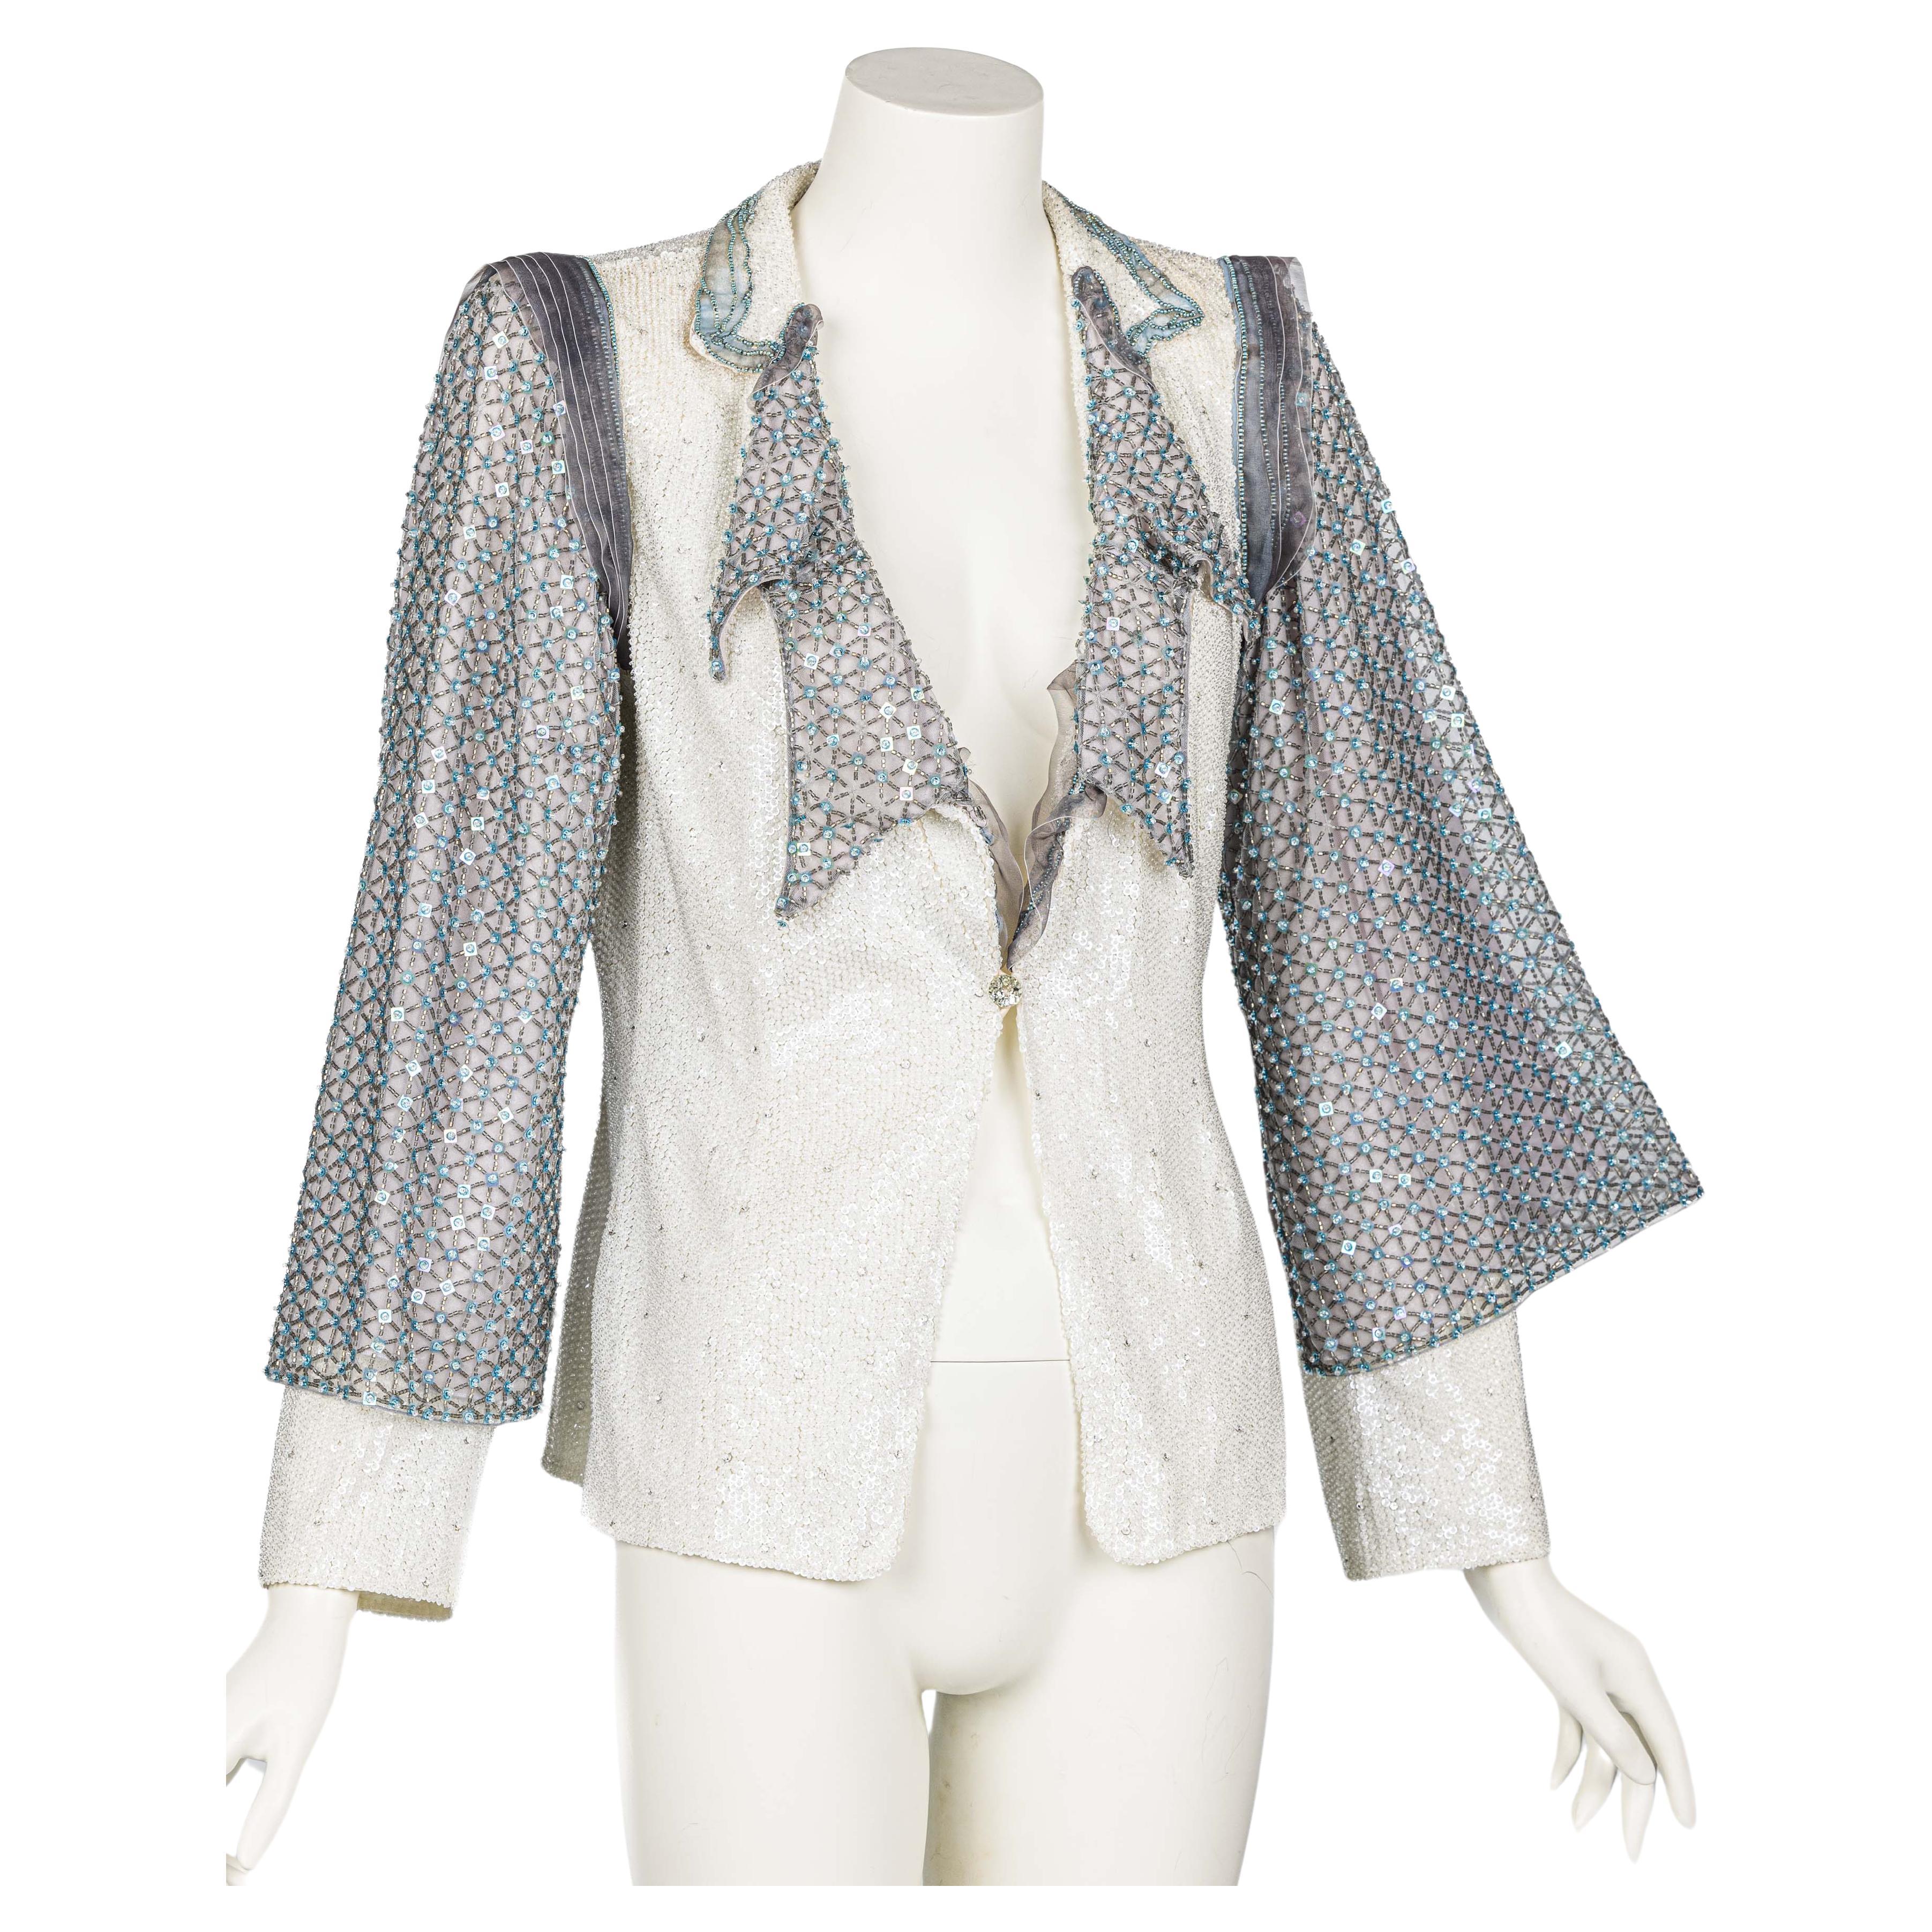 Giorgio Armani Beaded Crystal & Sequin Jacket In Excellent Condition For Sale In Boca Raton, FL